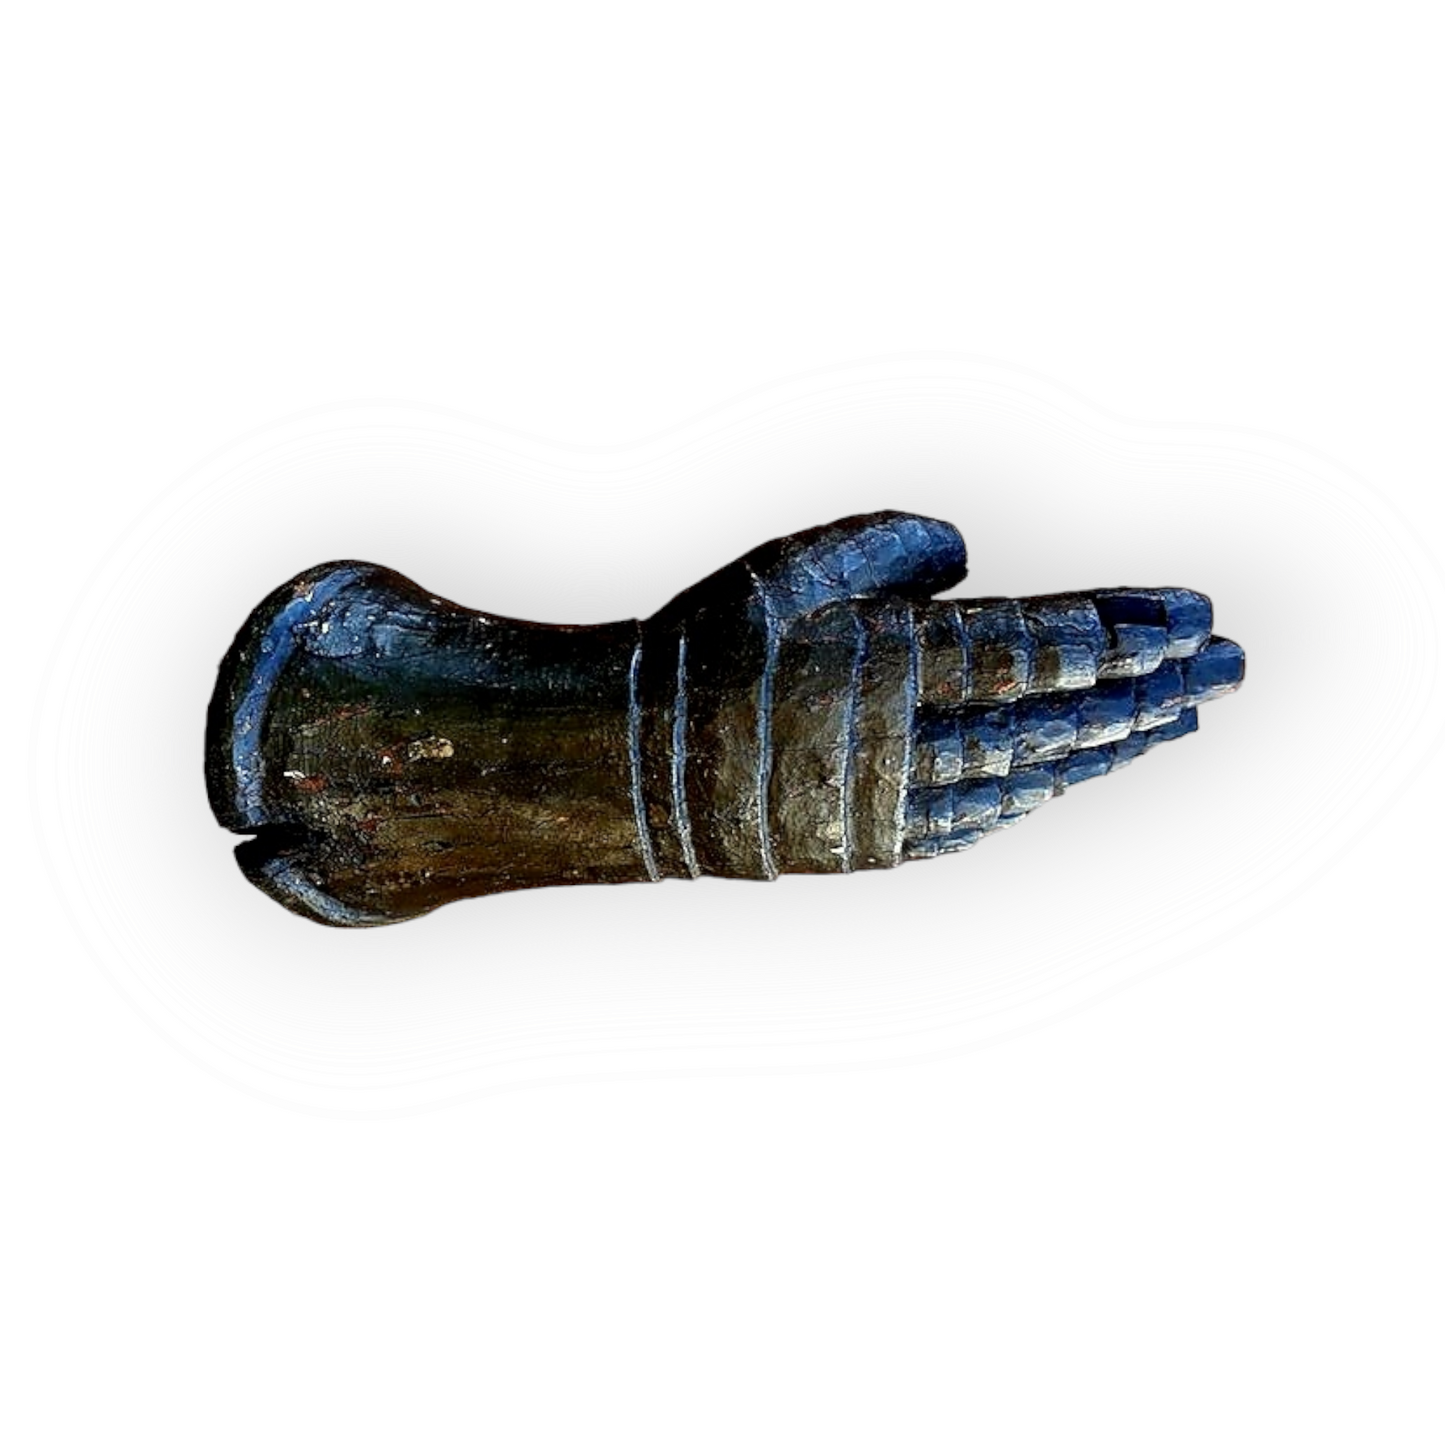 A Rare Life-Size Early 17th Century Antique Carved Wood Sculpture of an Armoured Glove or Gauntlet